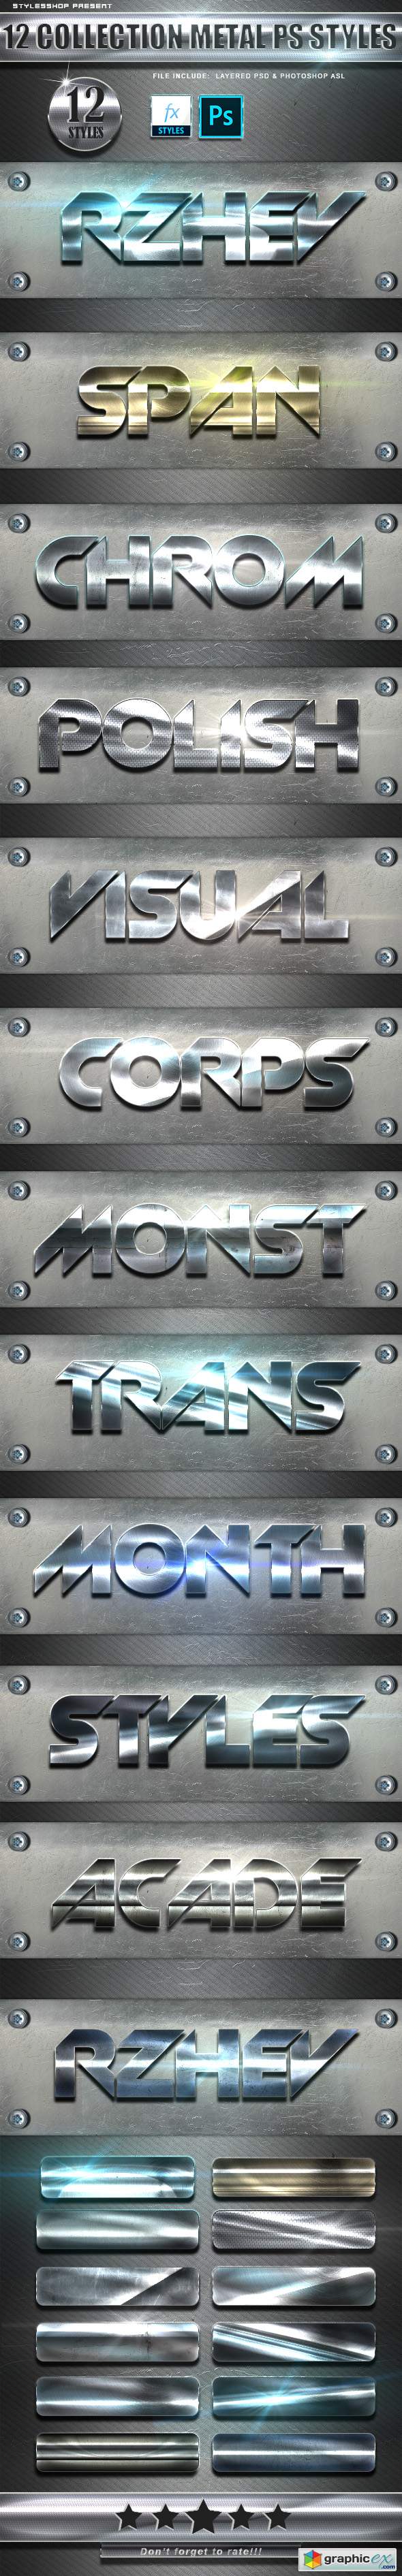 12 Collection Metal Photoshop Text Styles Vol 3